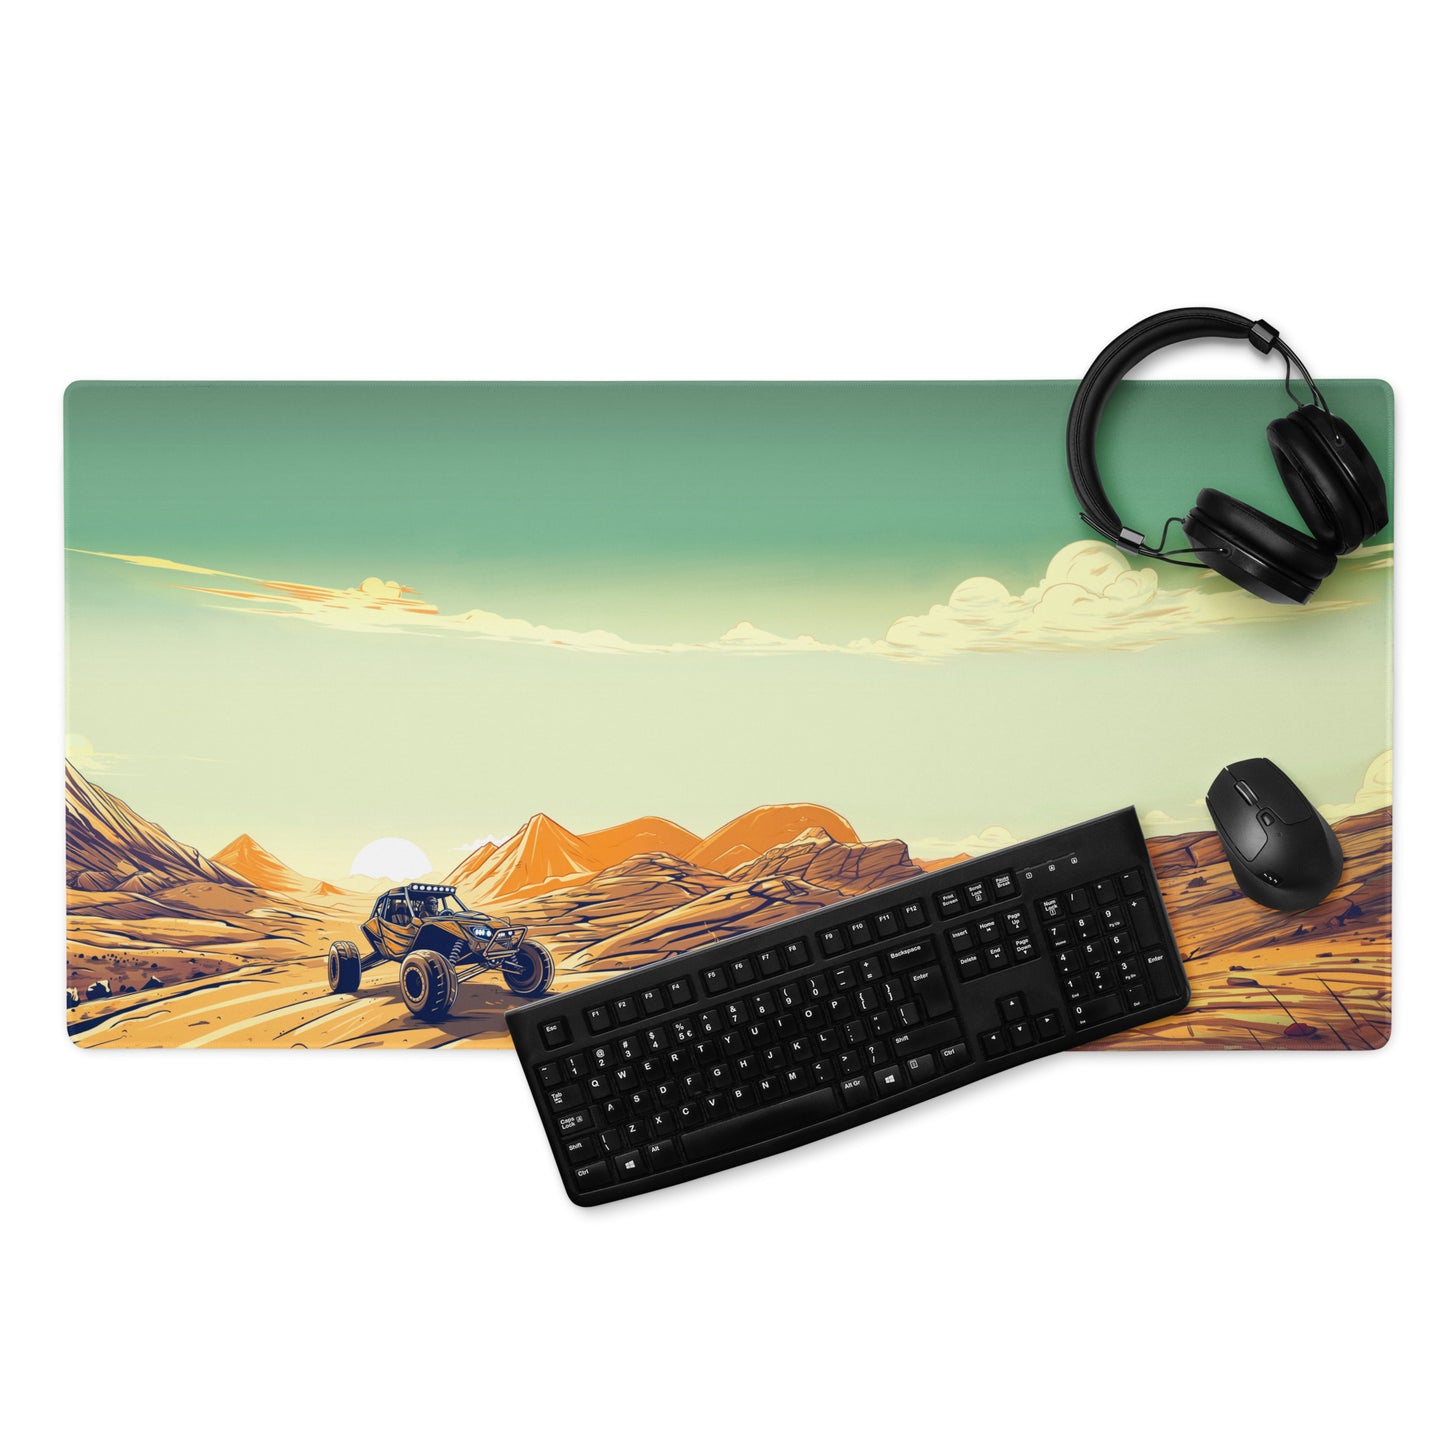 A 36" x 18" desk pad with a dune buggy in a desert landscape. With a keyboard, mouse, and headphones sitting on it.